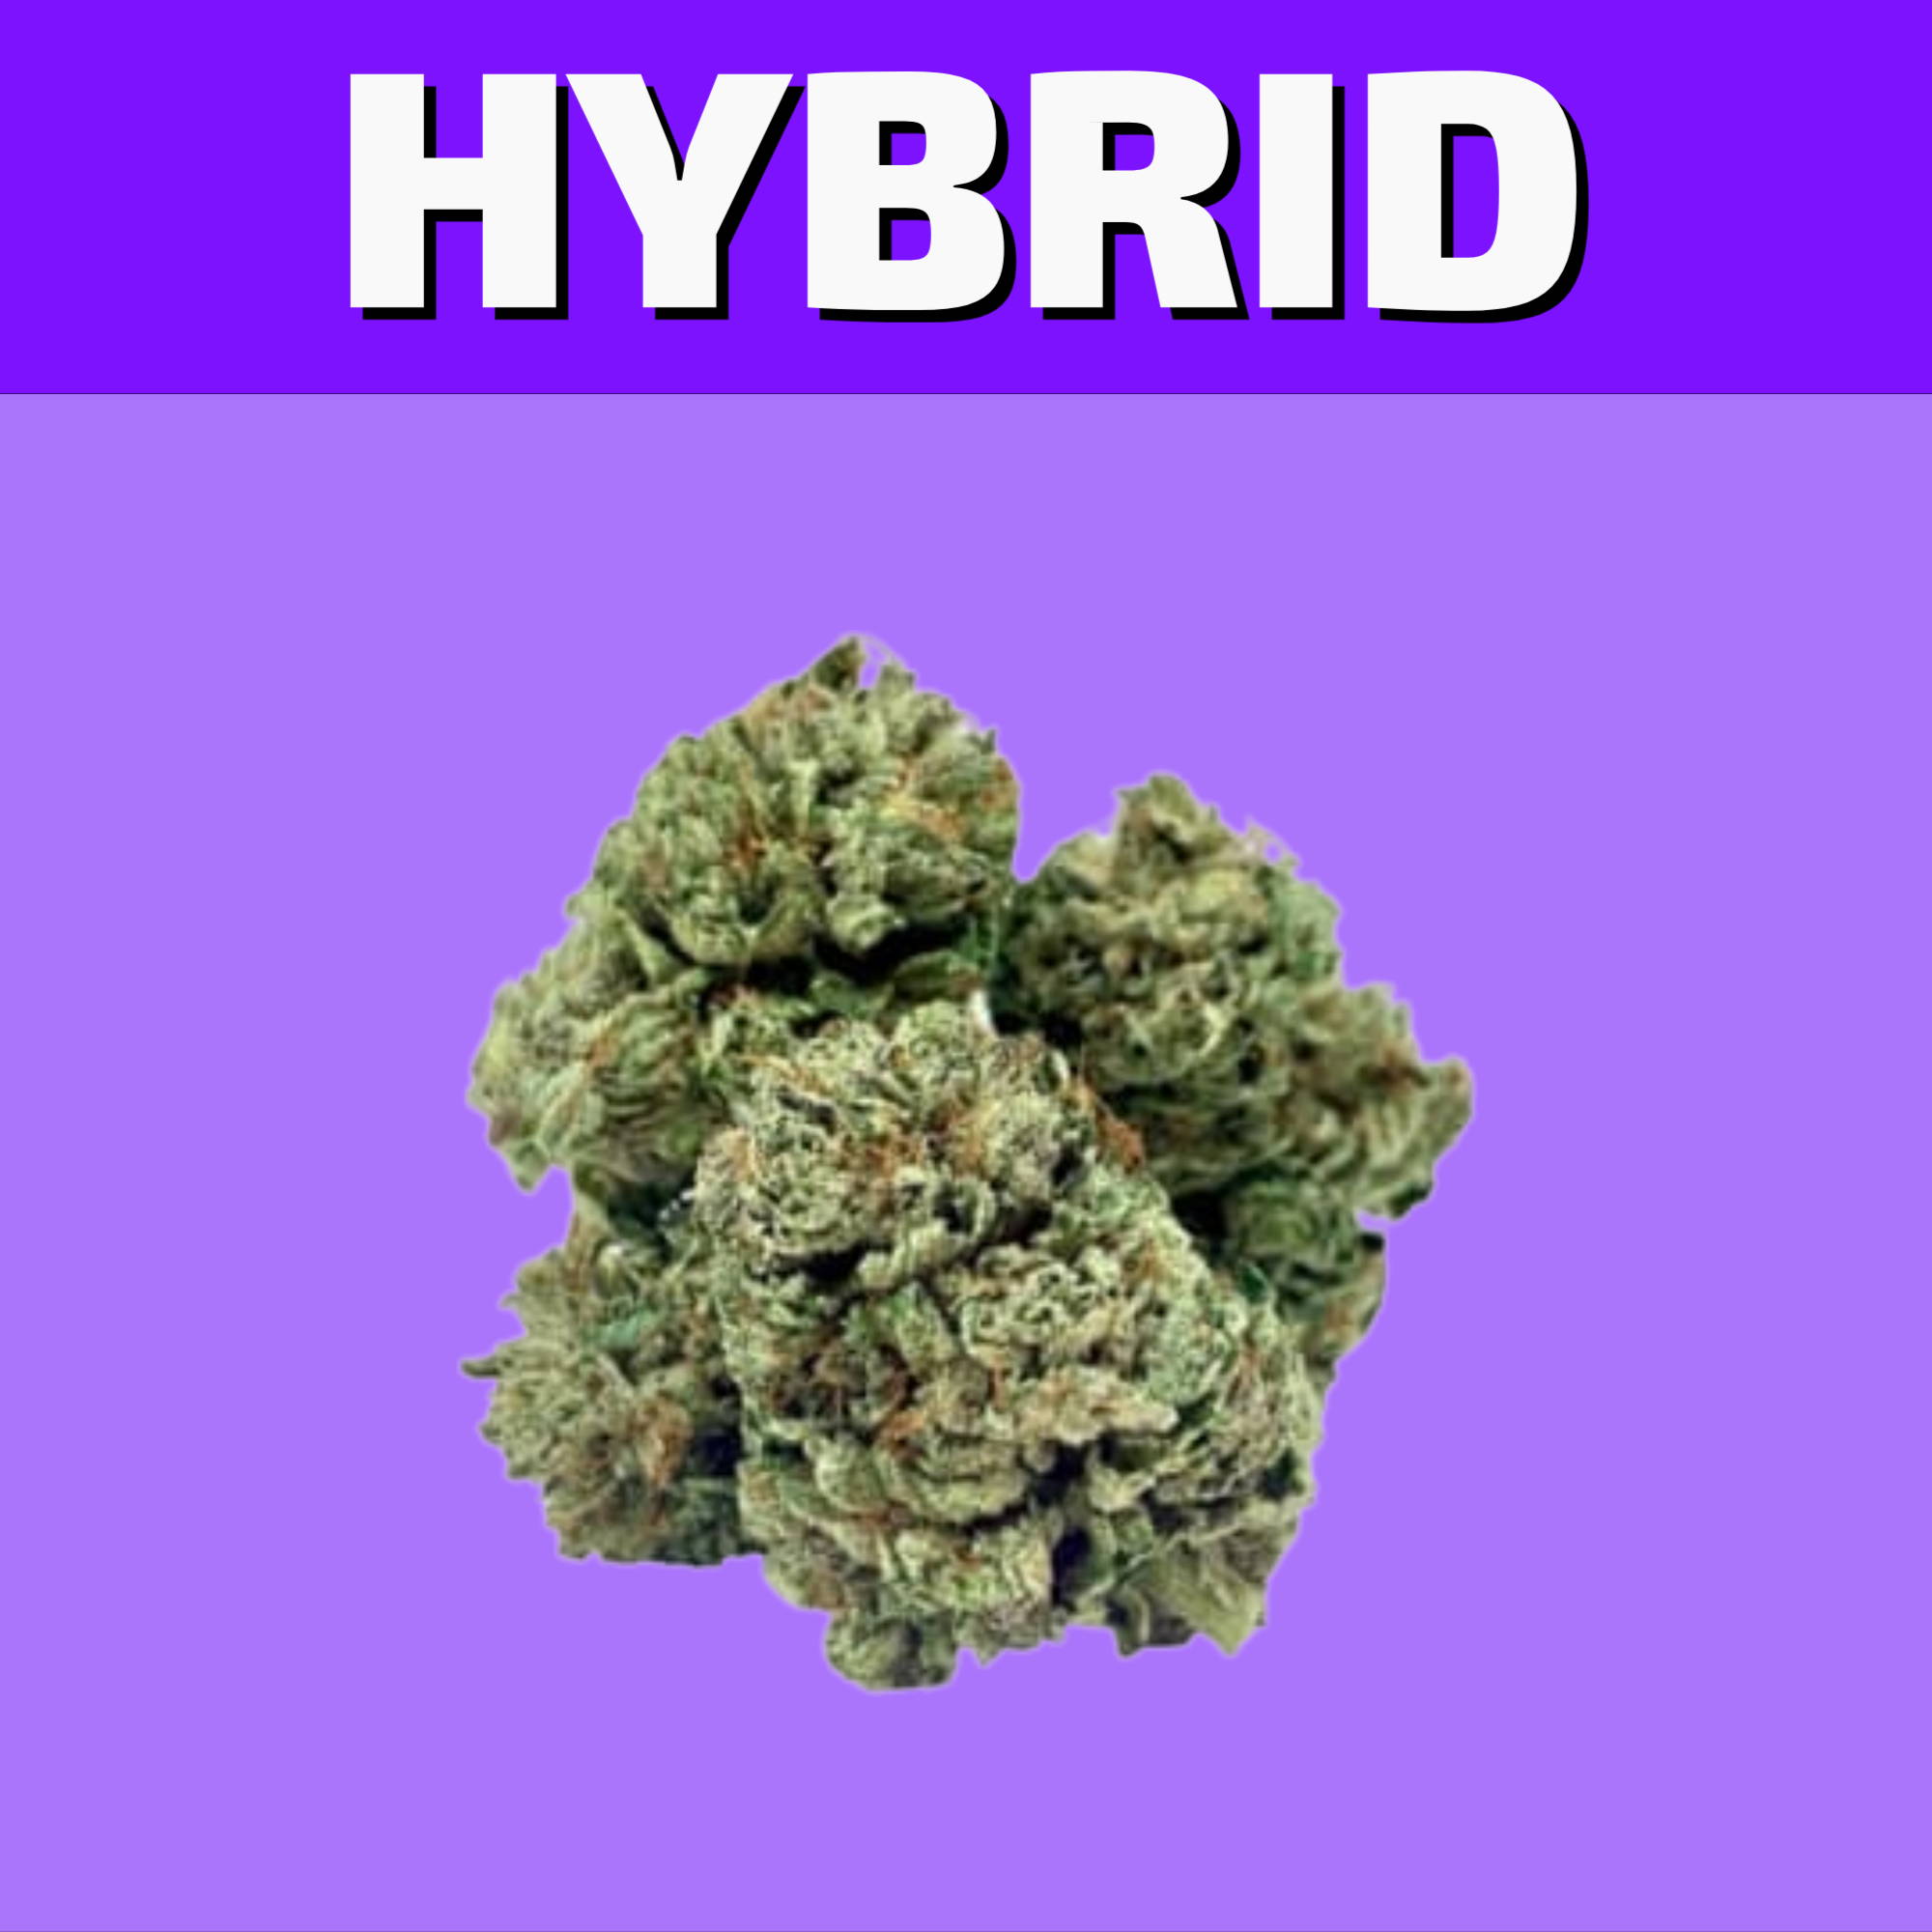 Shop our selection of Hybrid Weed online and have it delivered same day in Winnipeg or visit our cannabis store on 580 Academy Road.  